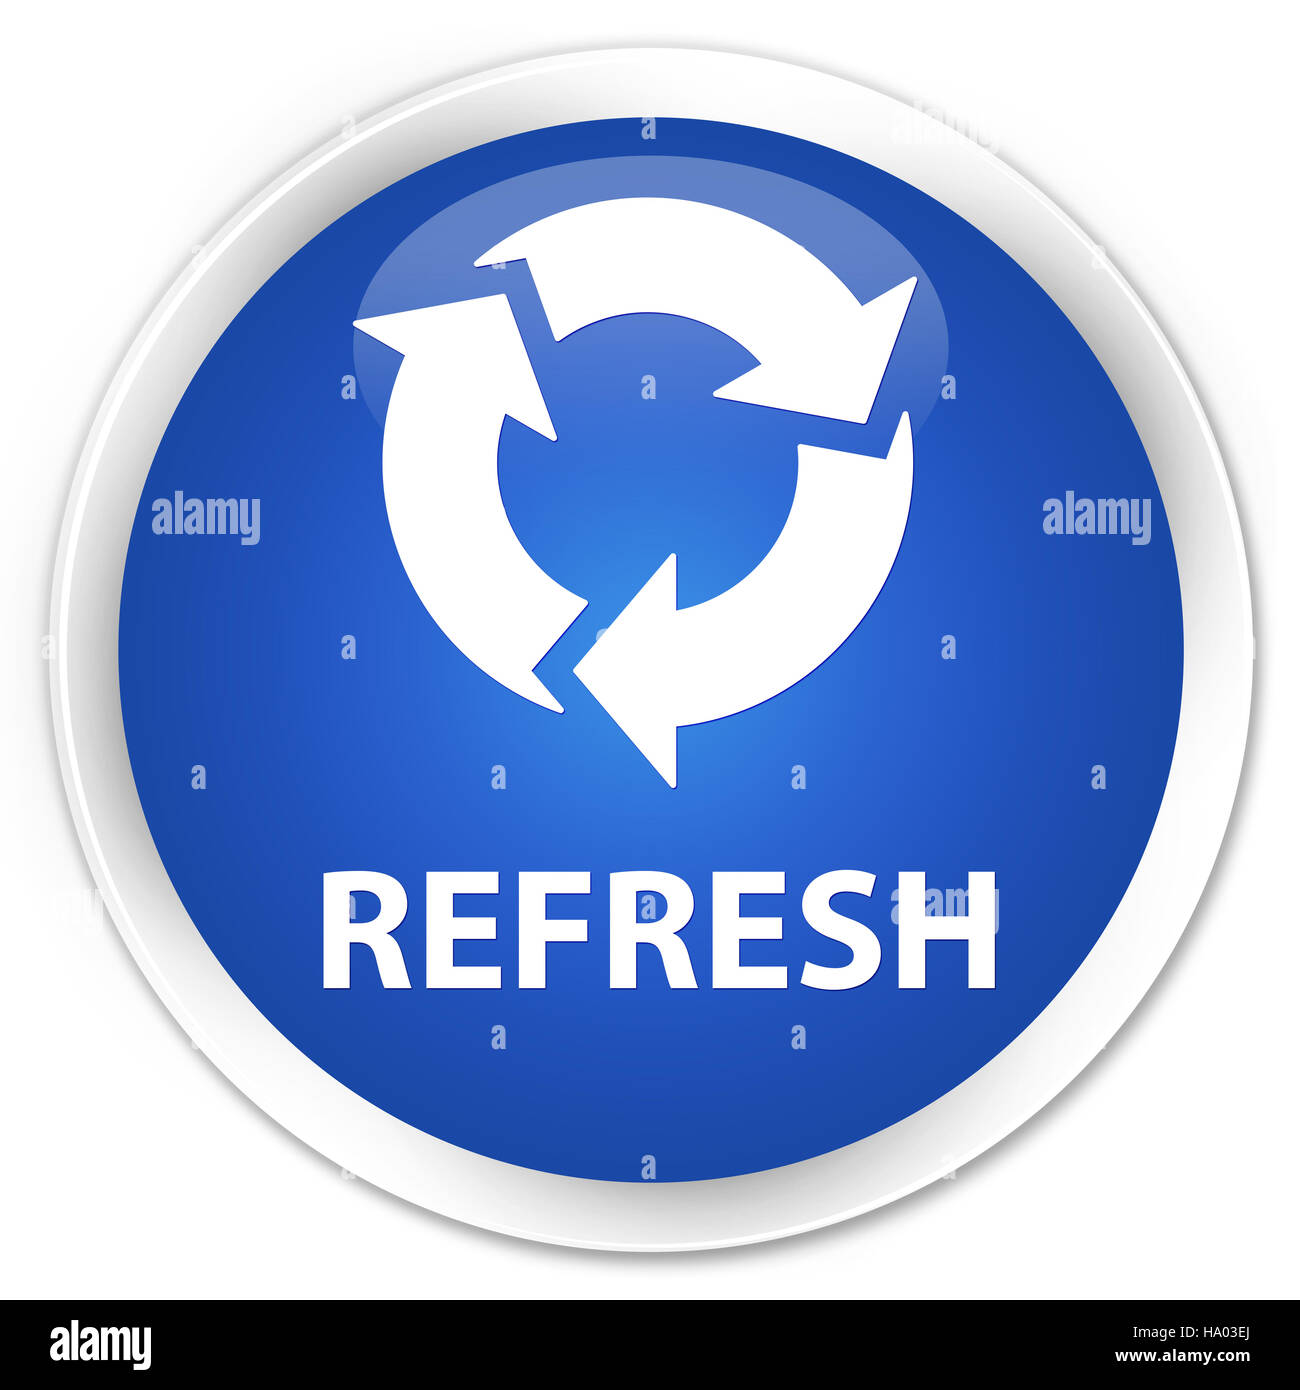 Refresh isolated on premium blue round button abstract illustration Stock Photo